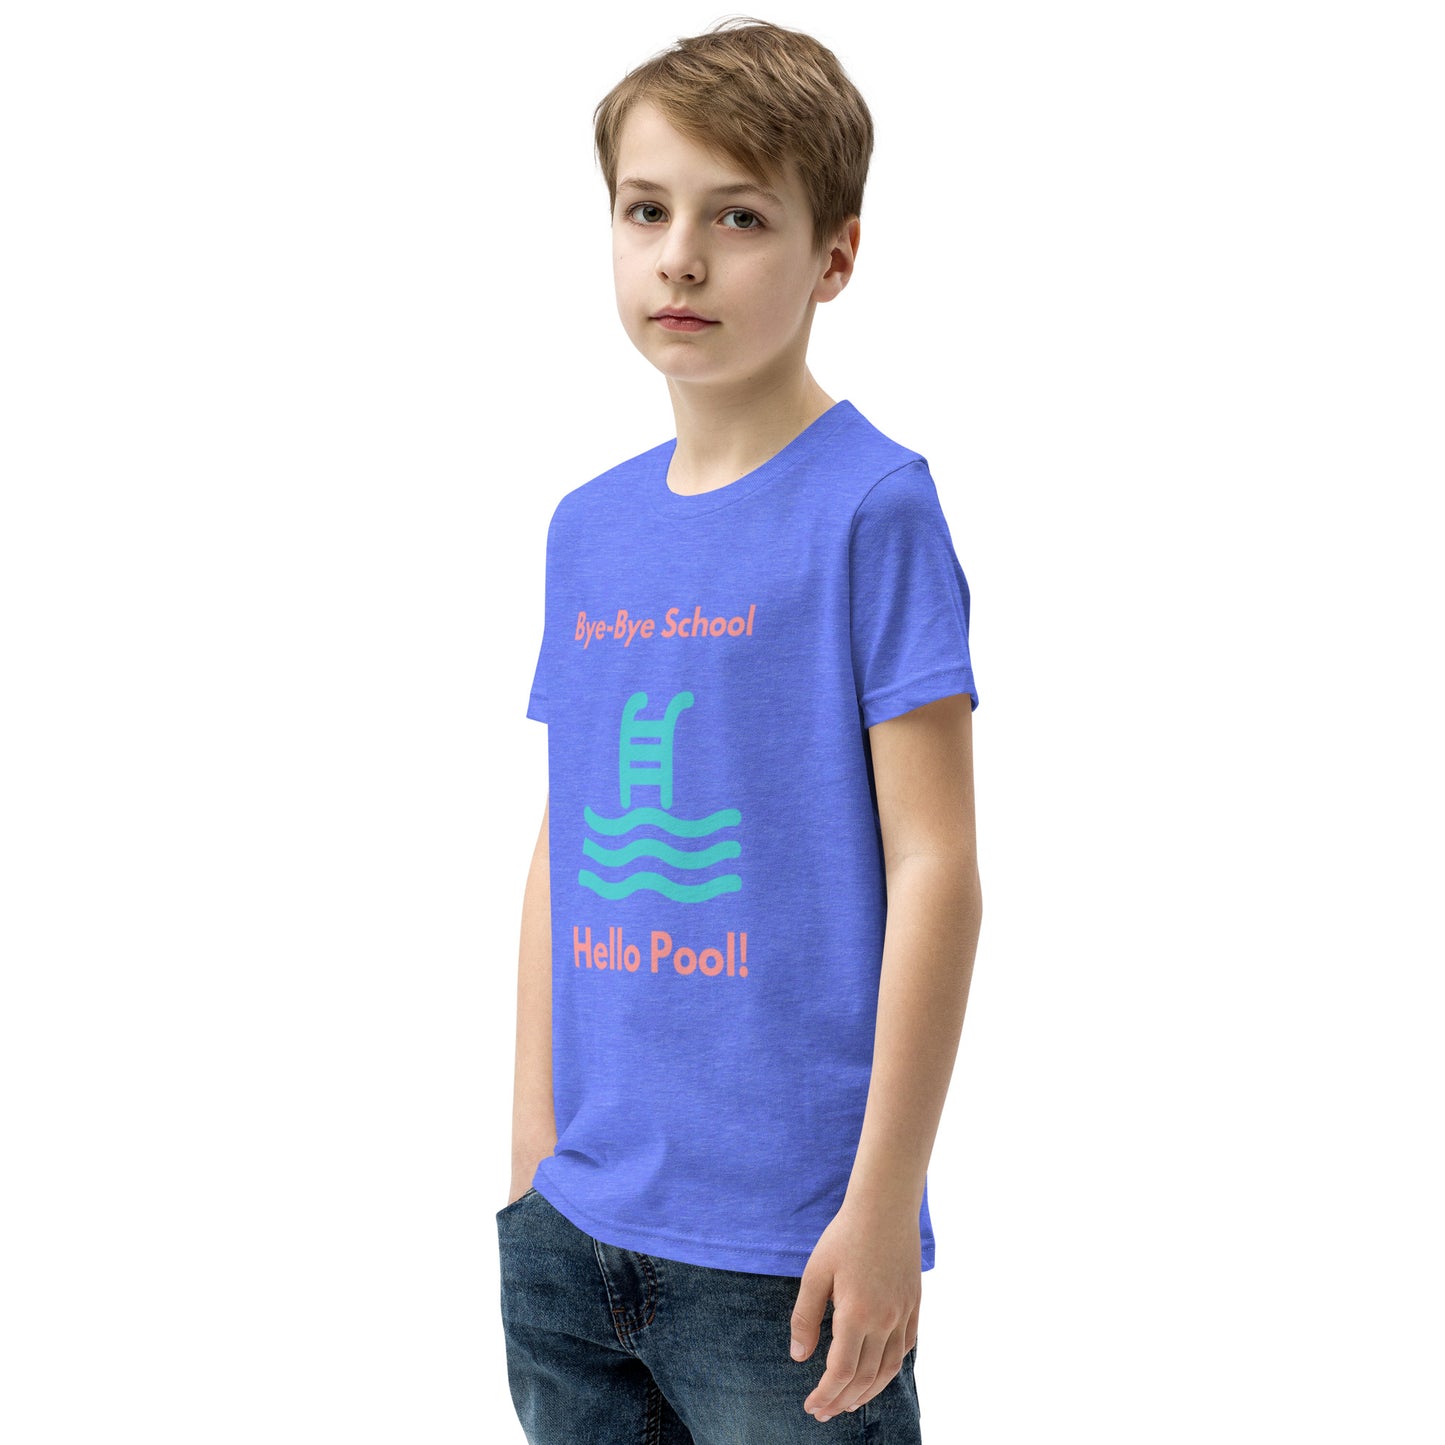 "Hello Pool, Goodbye School!" - Youth Short Sleeve T-Shirt | Comfy and Unique Design